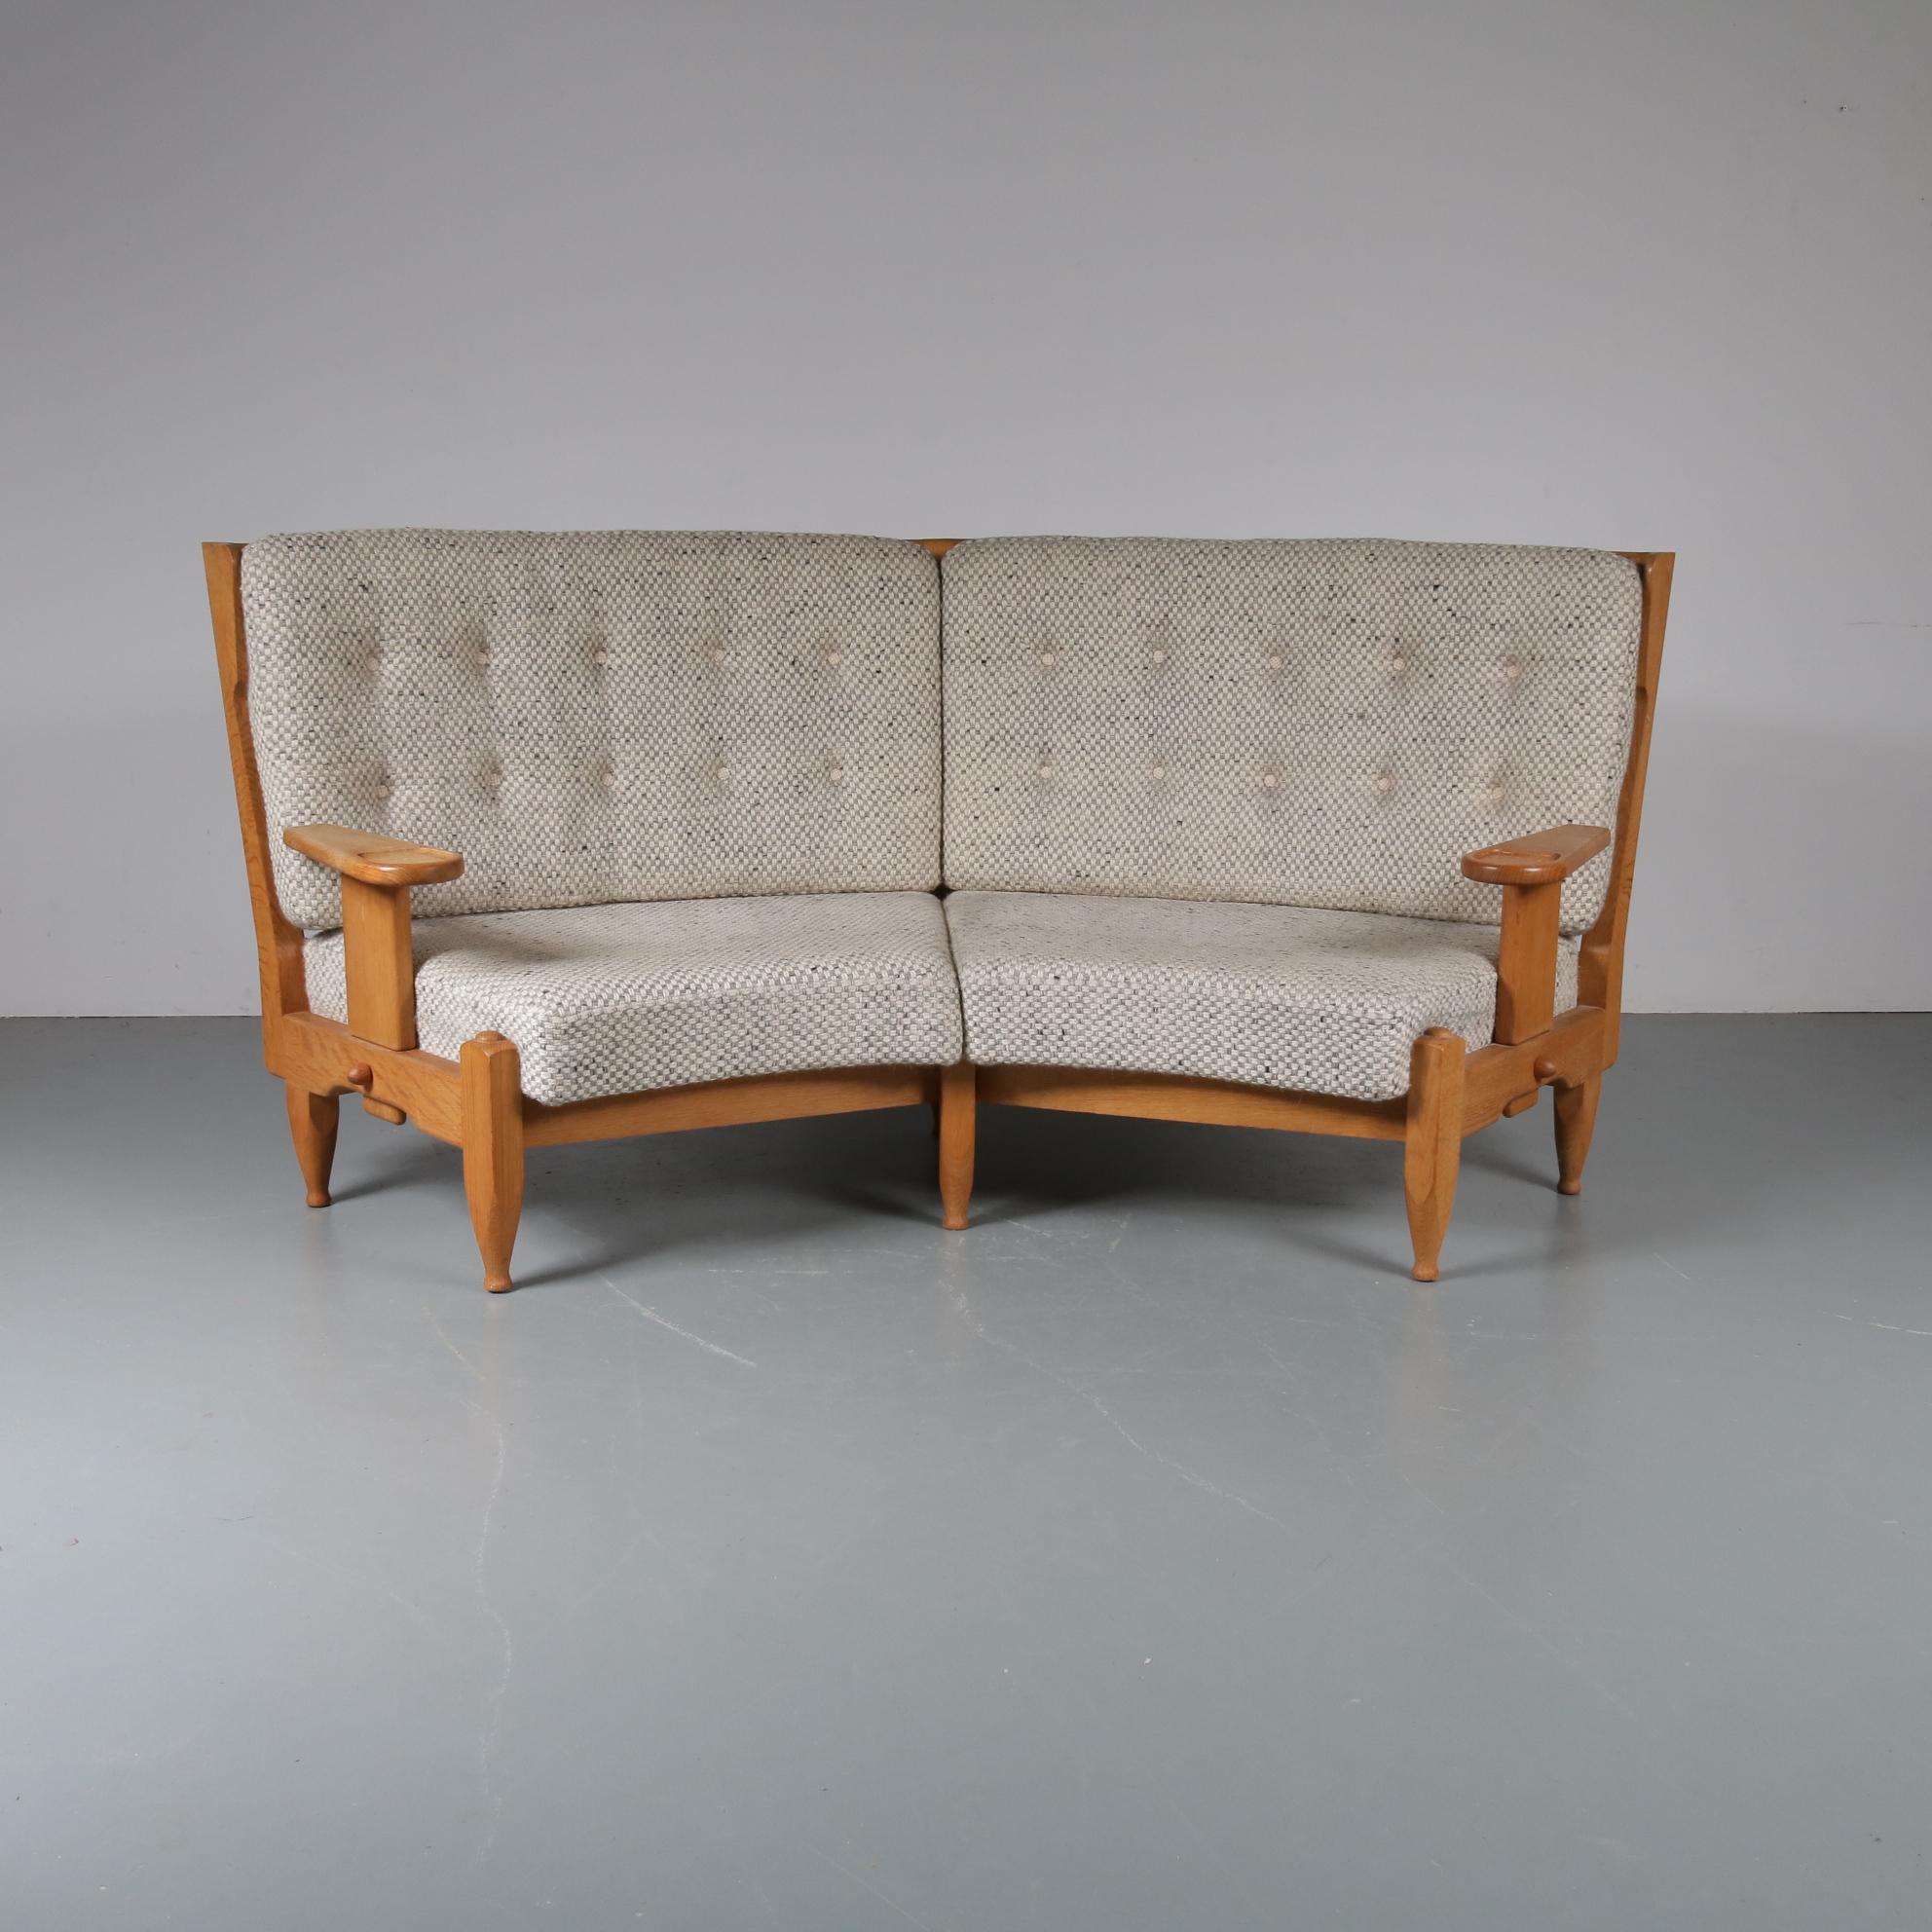 A beautiful settee / corner sofa by Guillerme et Chambron, manufactured in France in the 1940s.

Made of high quality natural colored oakwood with a beautiful rustic style and eye-catching geometrical shapes cut out in the back. That eye-catching